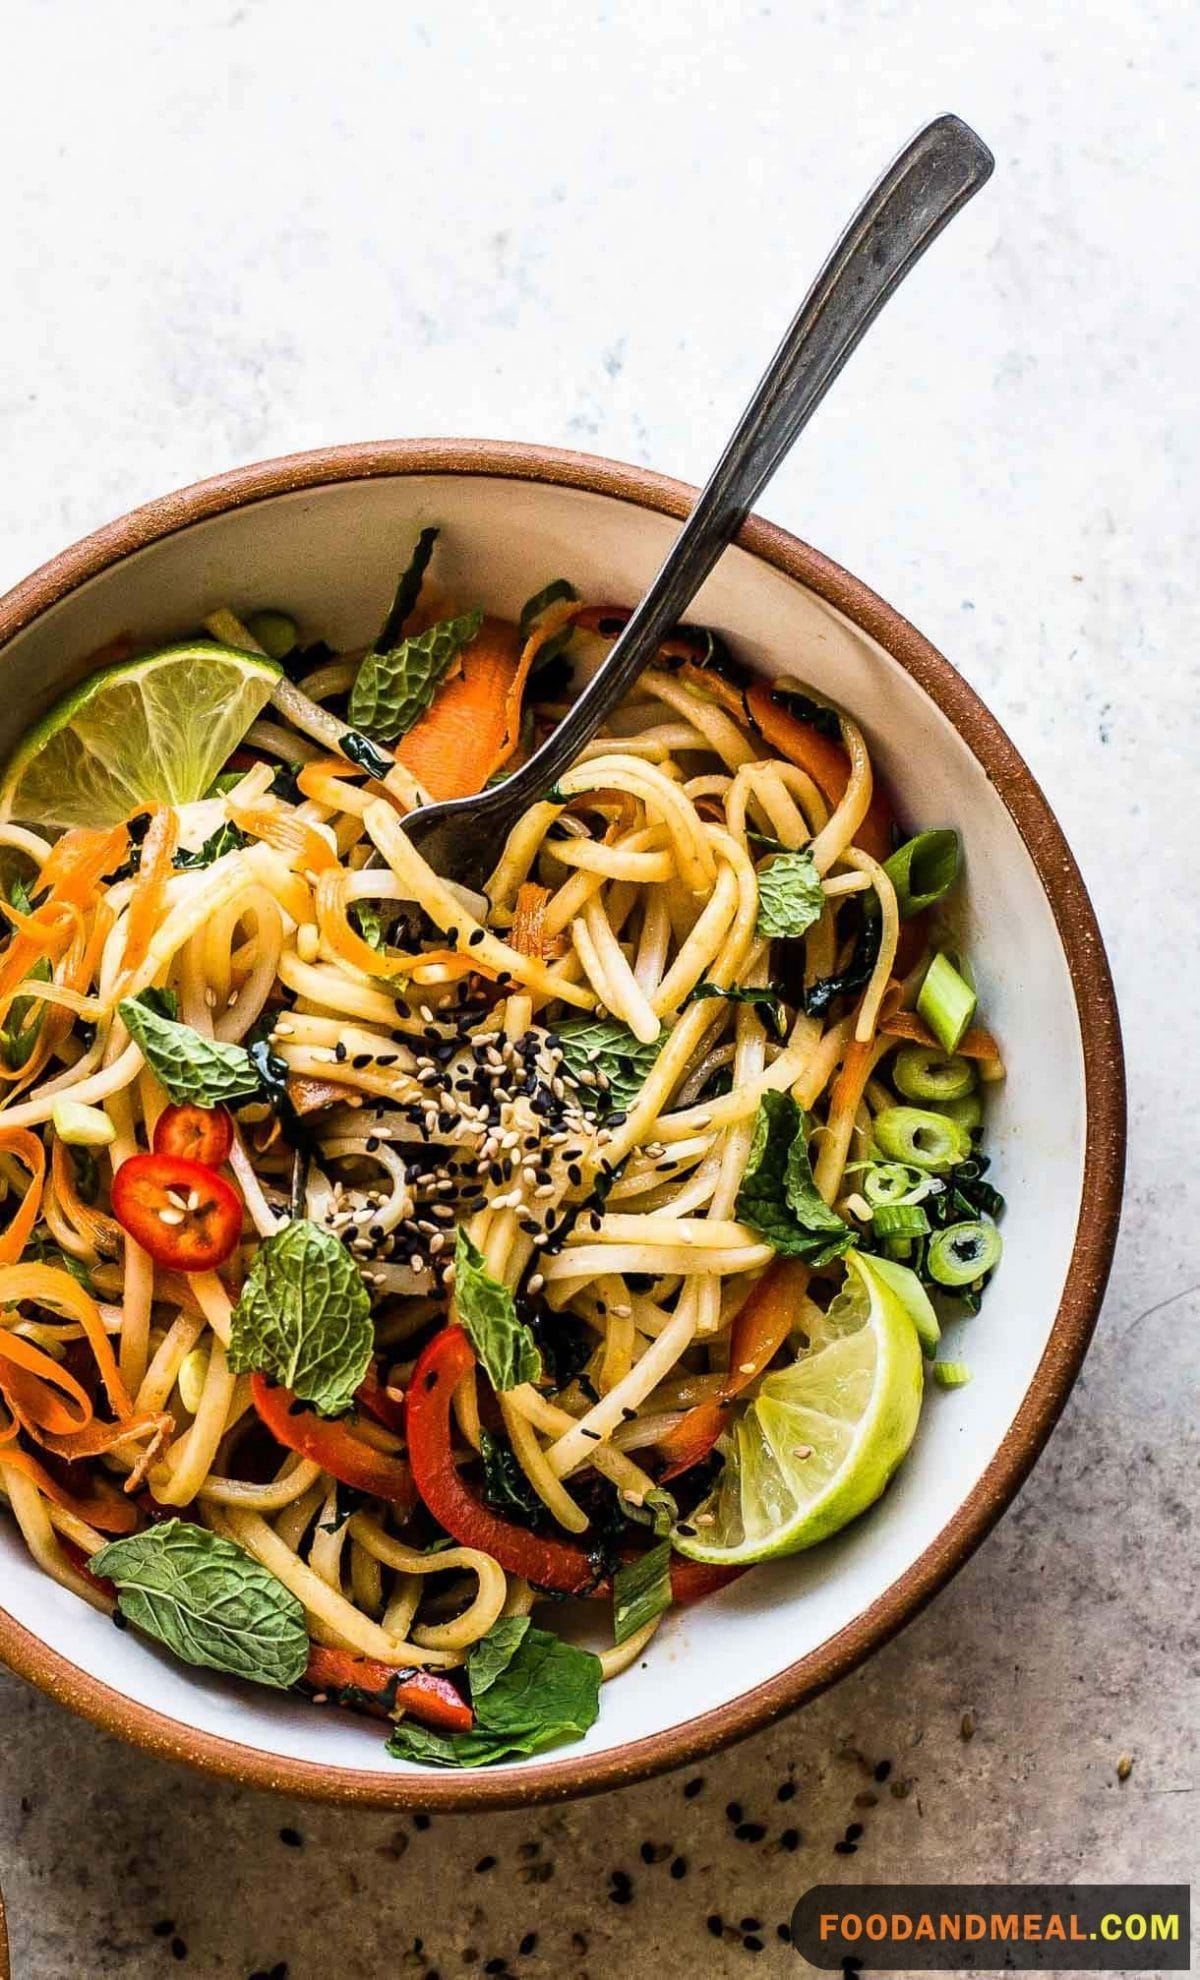 Vibrant Veggies Meet The Soft Allure Of Perfectly Soaked Noodles.